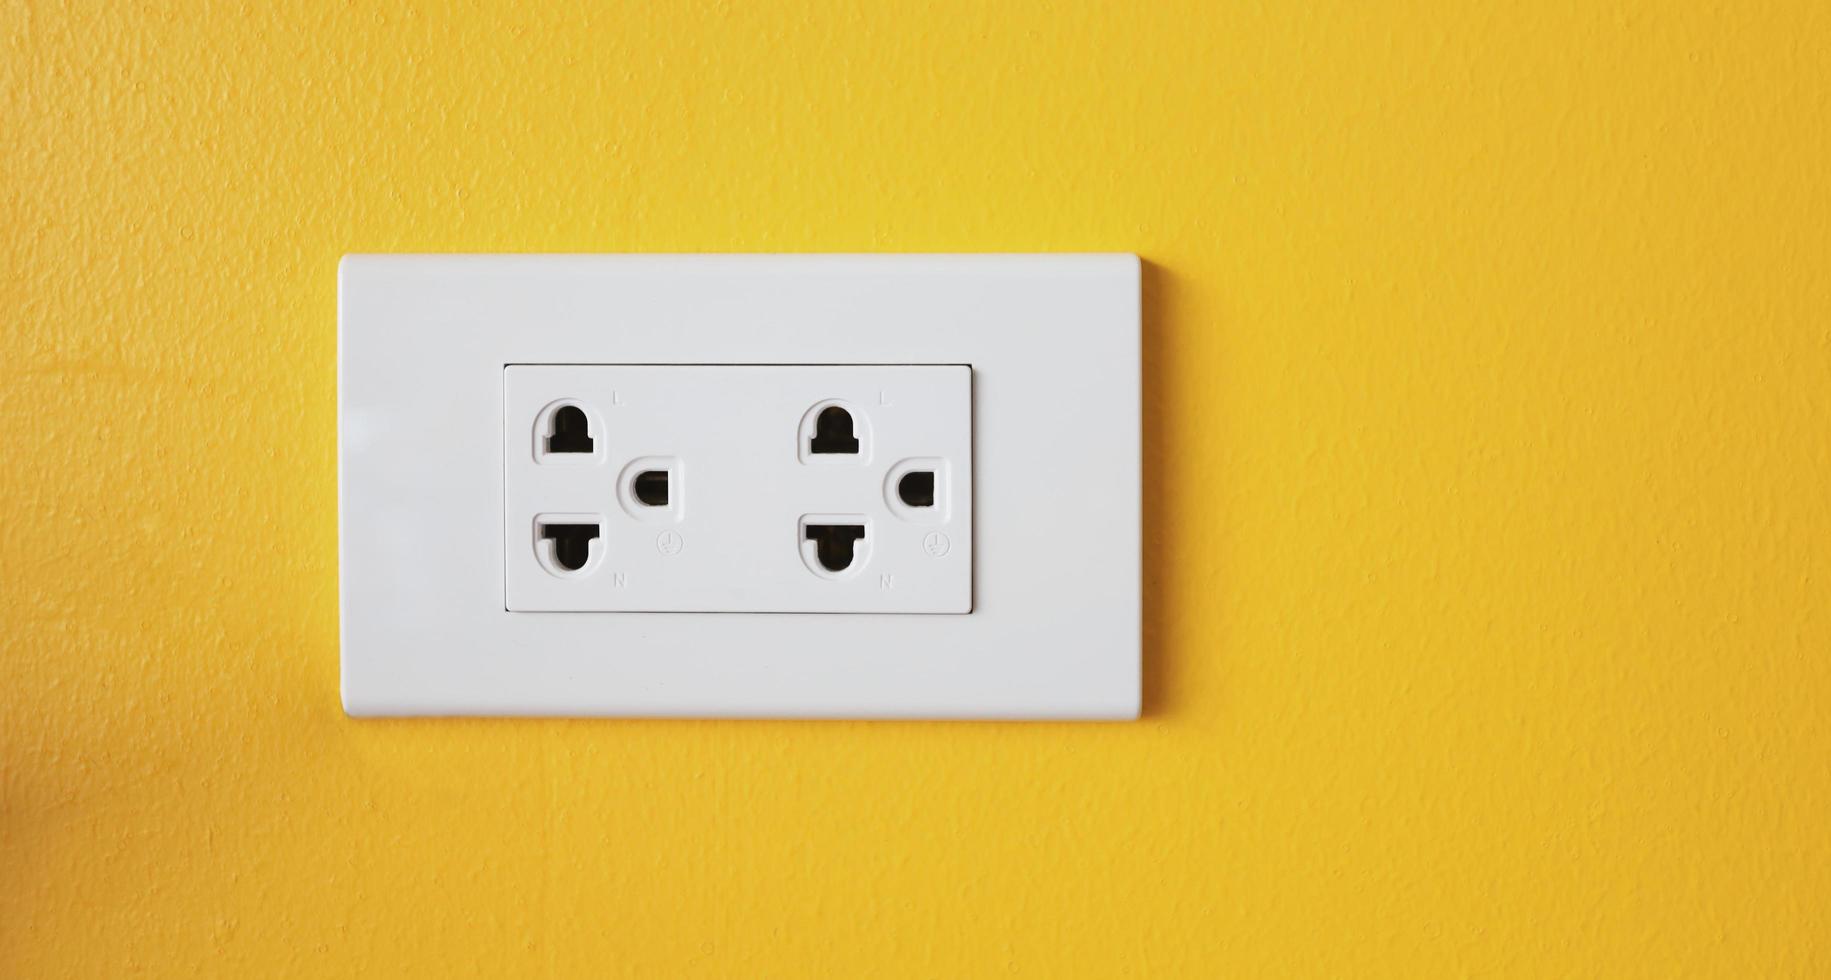 The power sockets on the walls are painted in bright yellow. photo